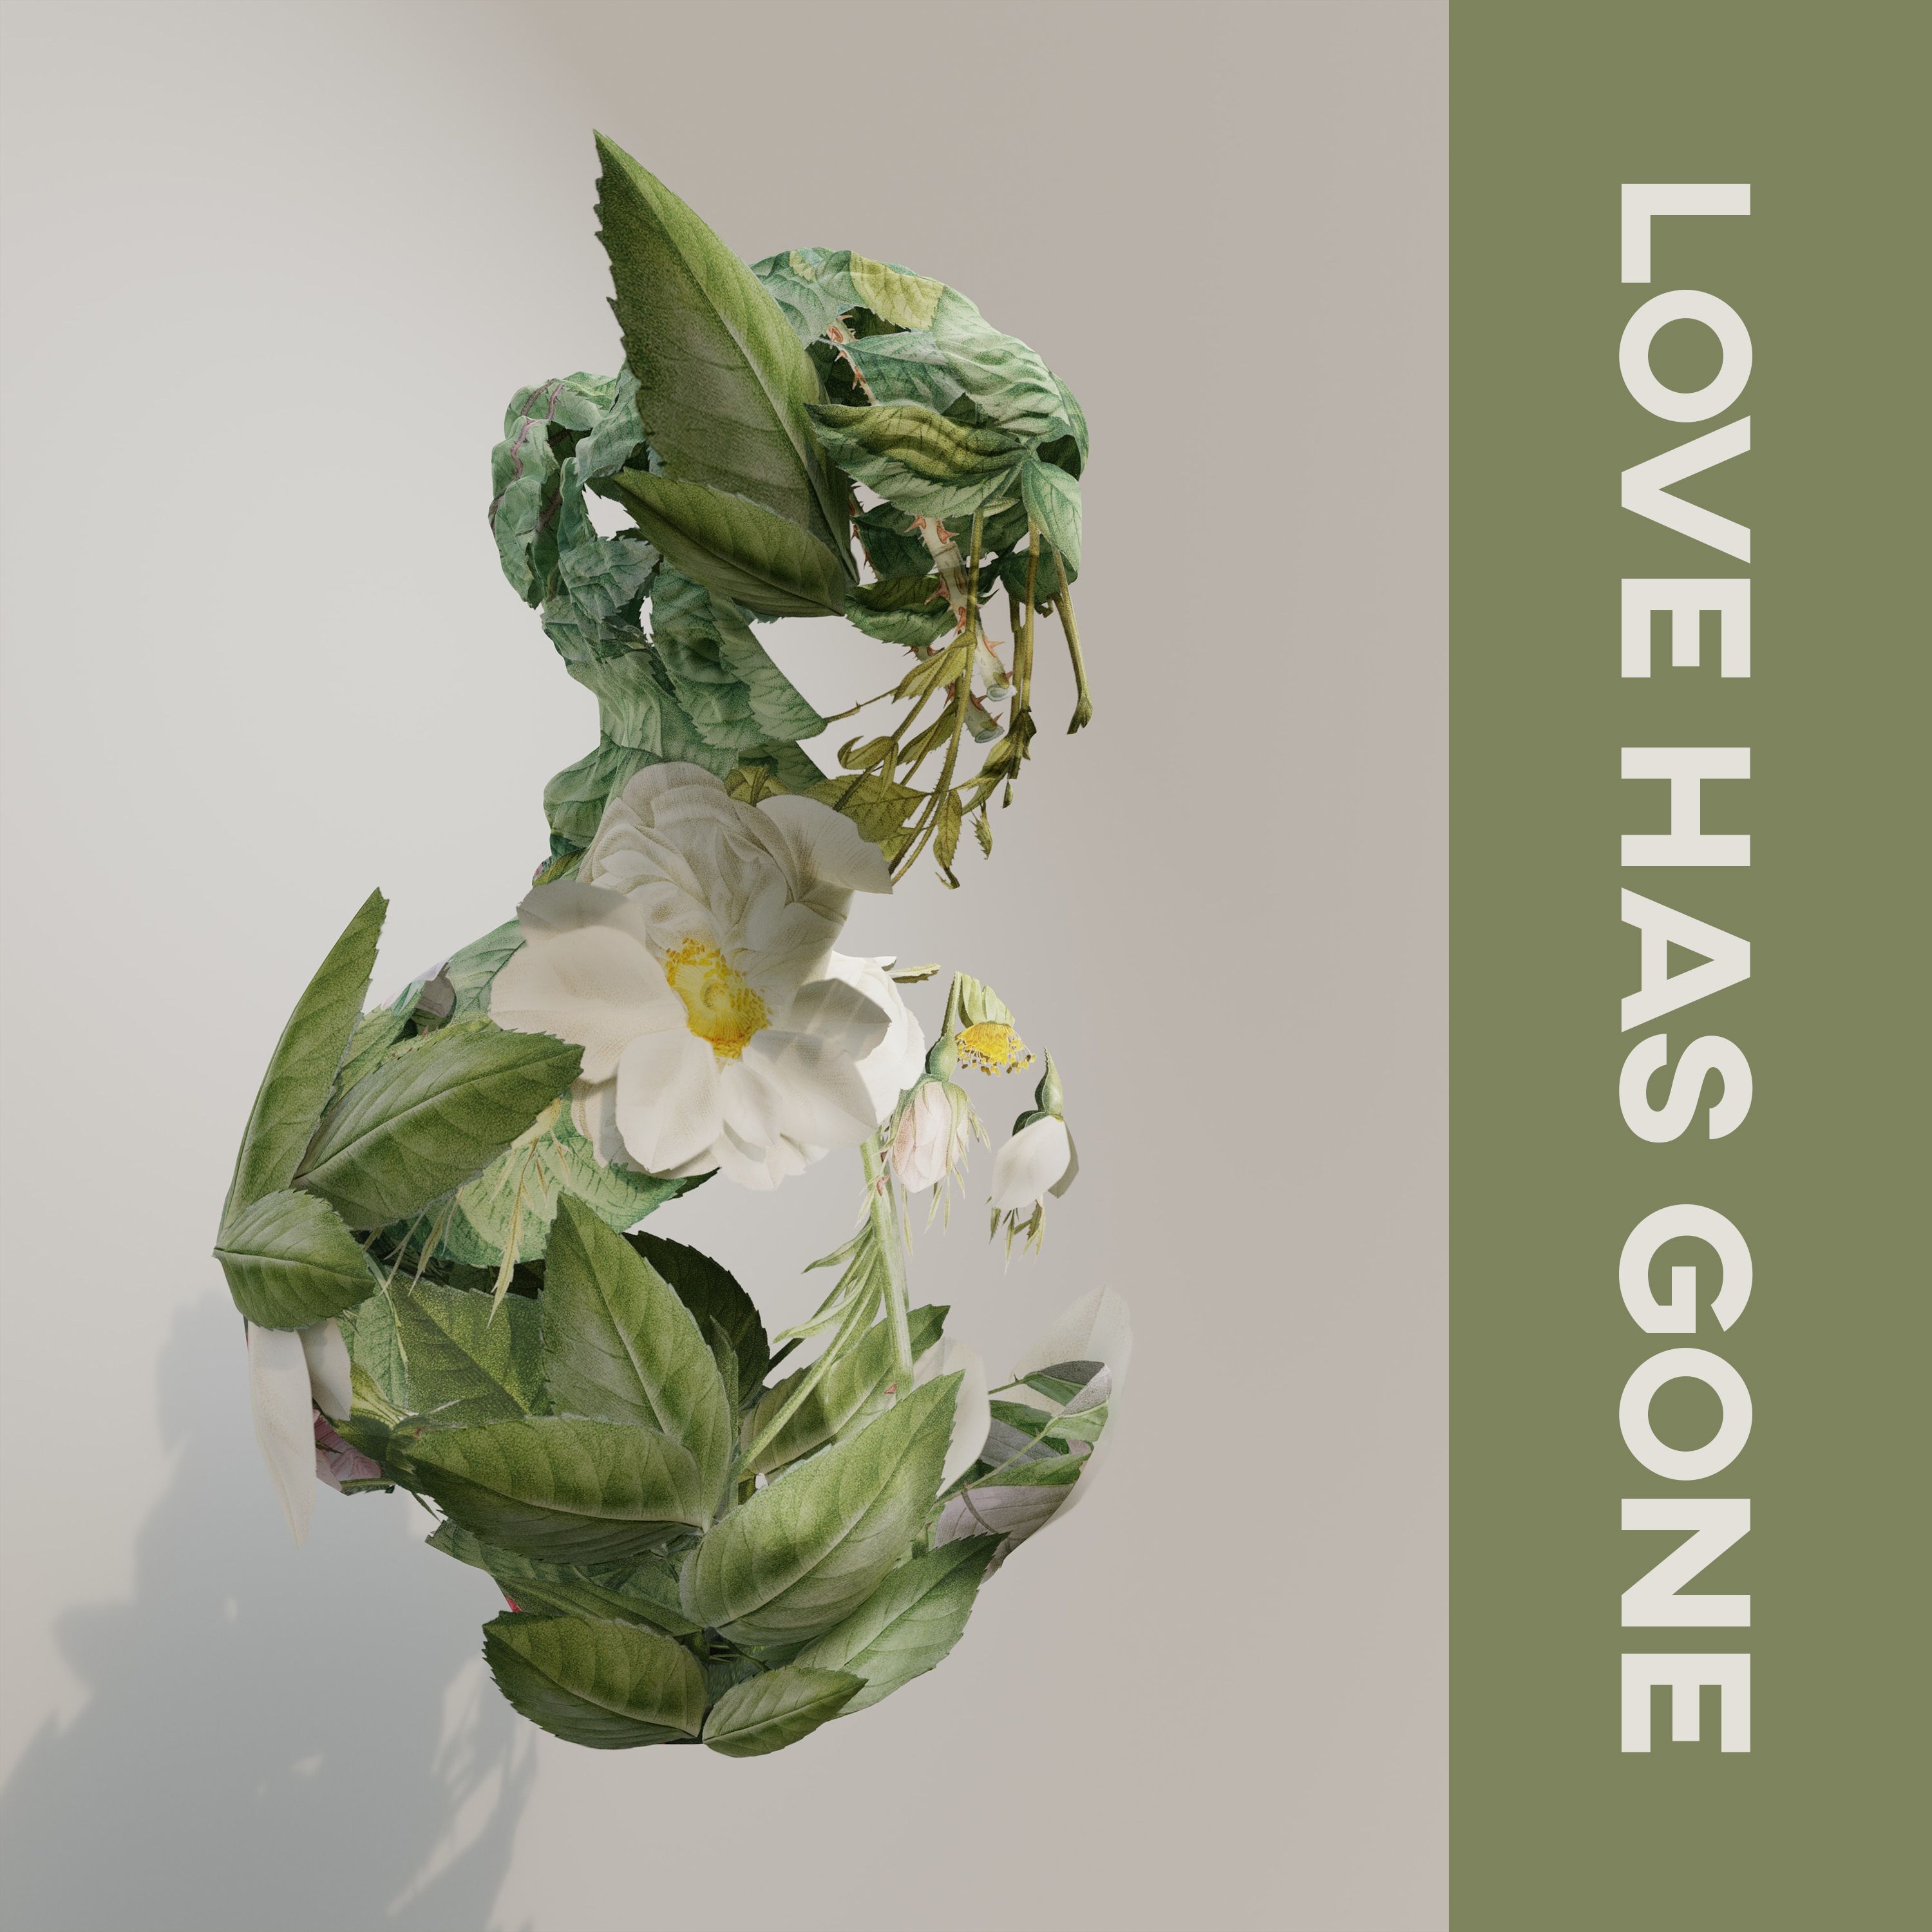 Download c152 - Love Has Gone